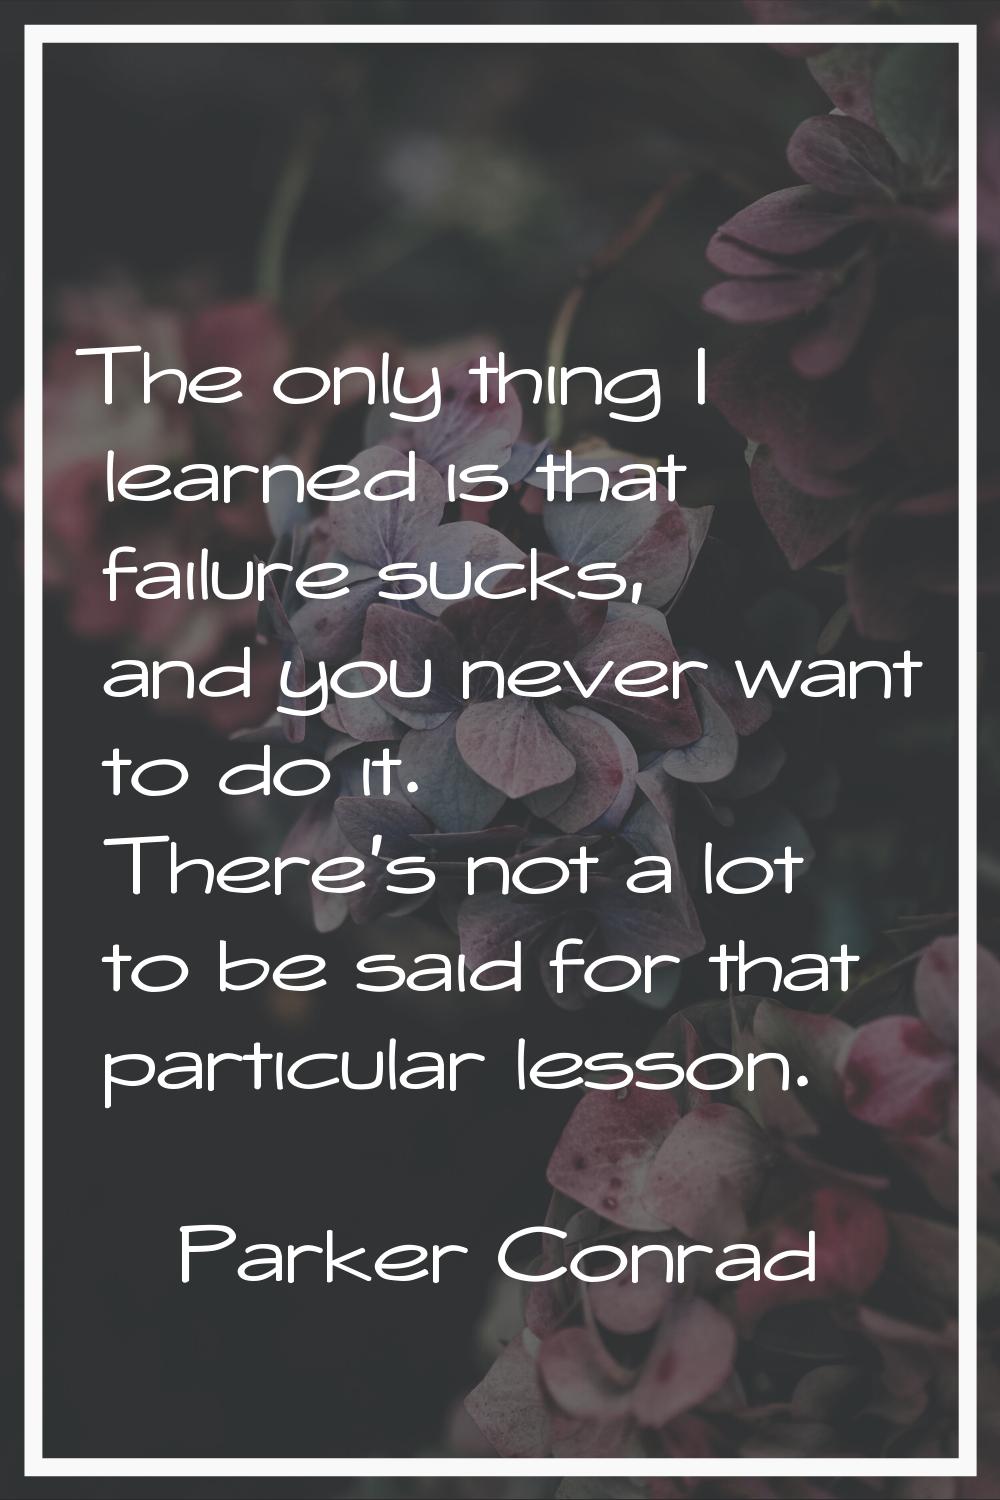 The only thing I learned is that failure sucks, and you never want to do it. There's not a lot to b